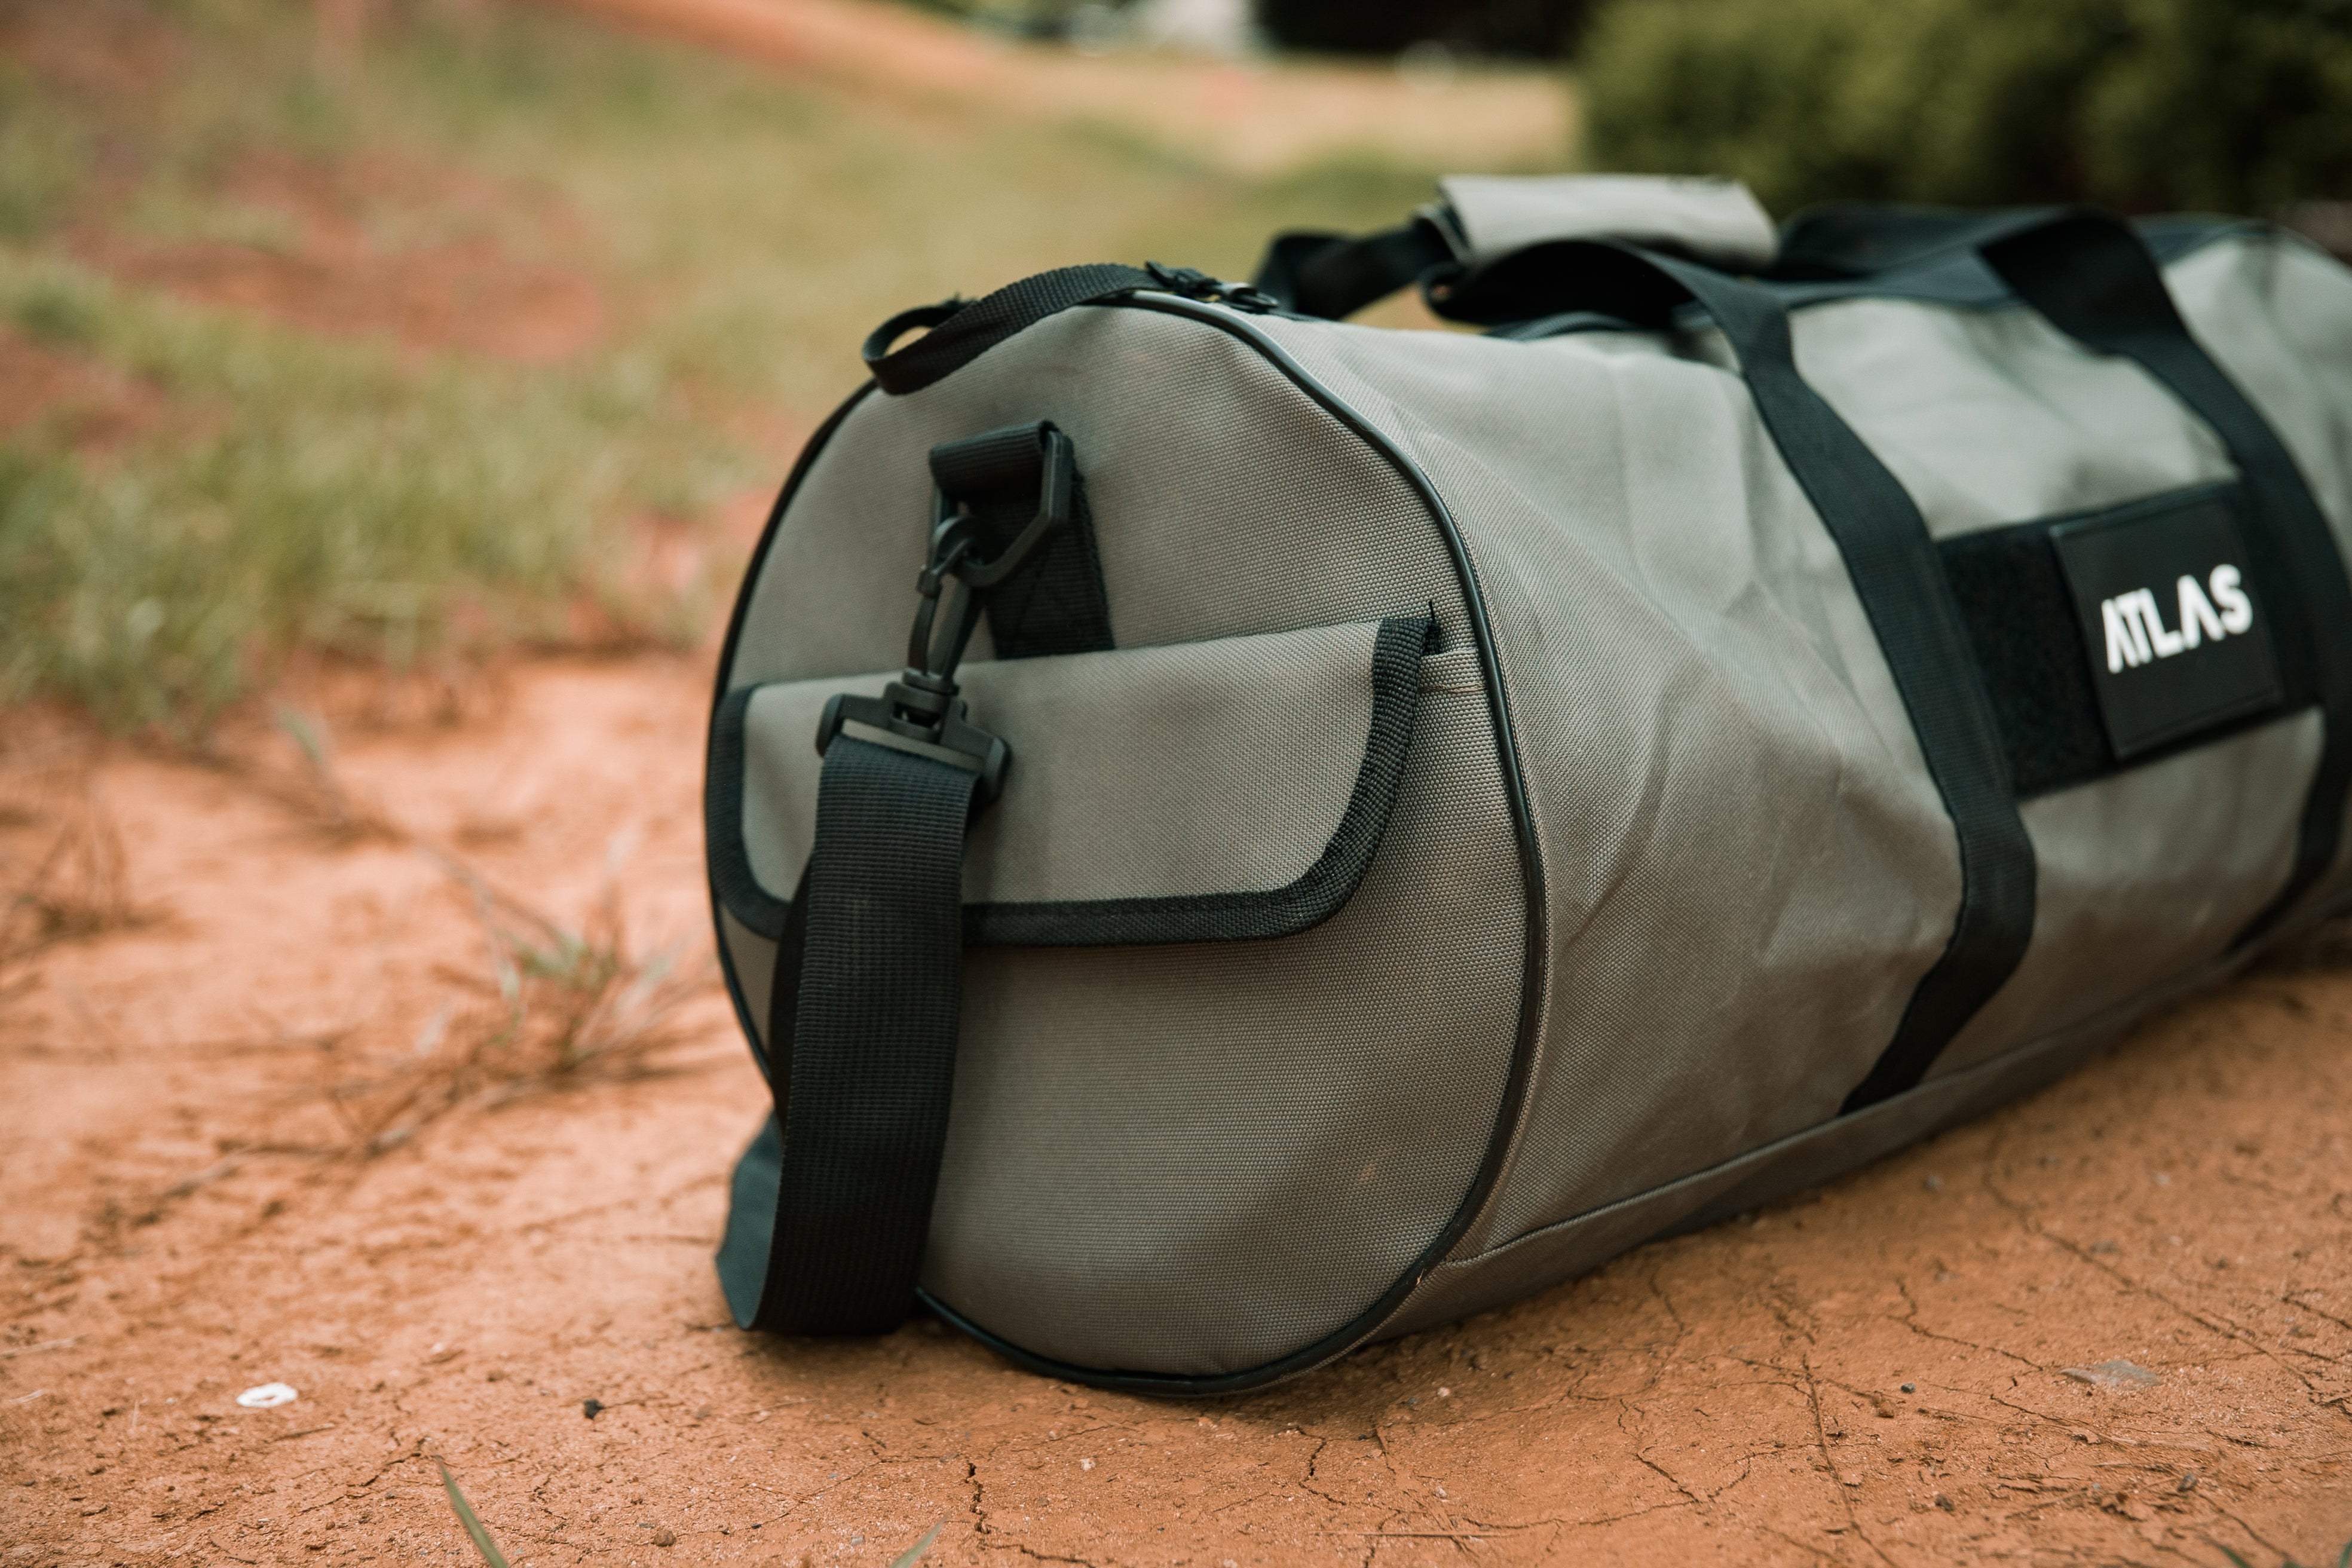 Atlas 46 - For a limited run. The Bucket Mouth Tool Bag™... | Facebook